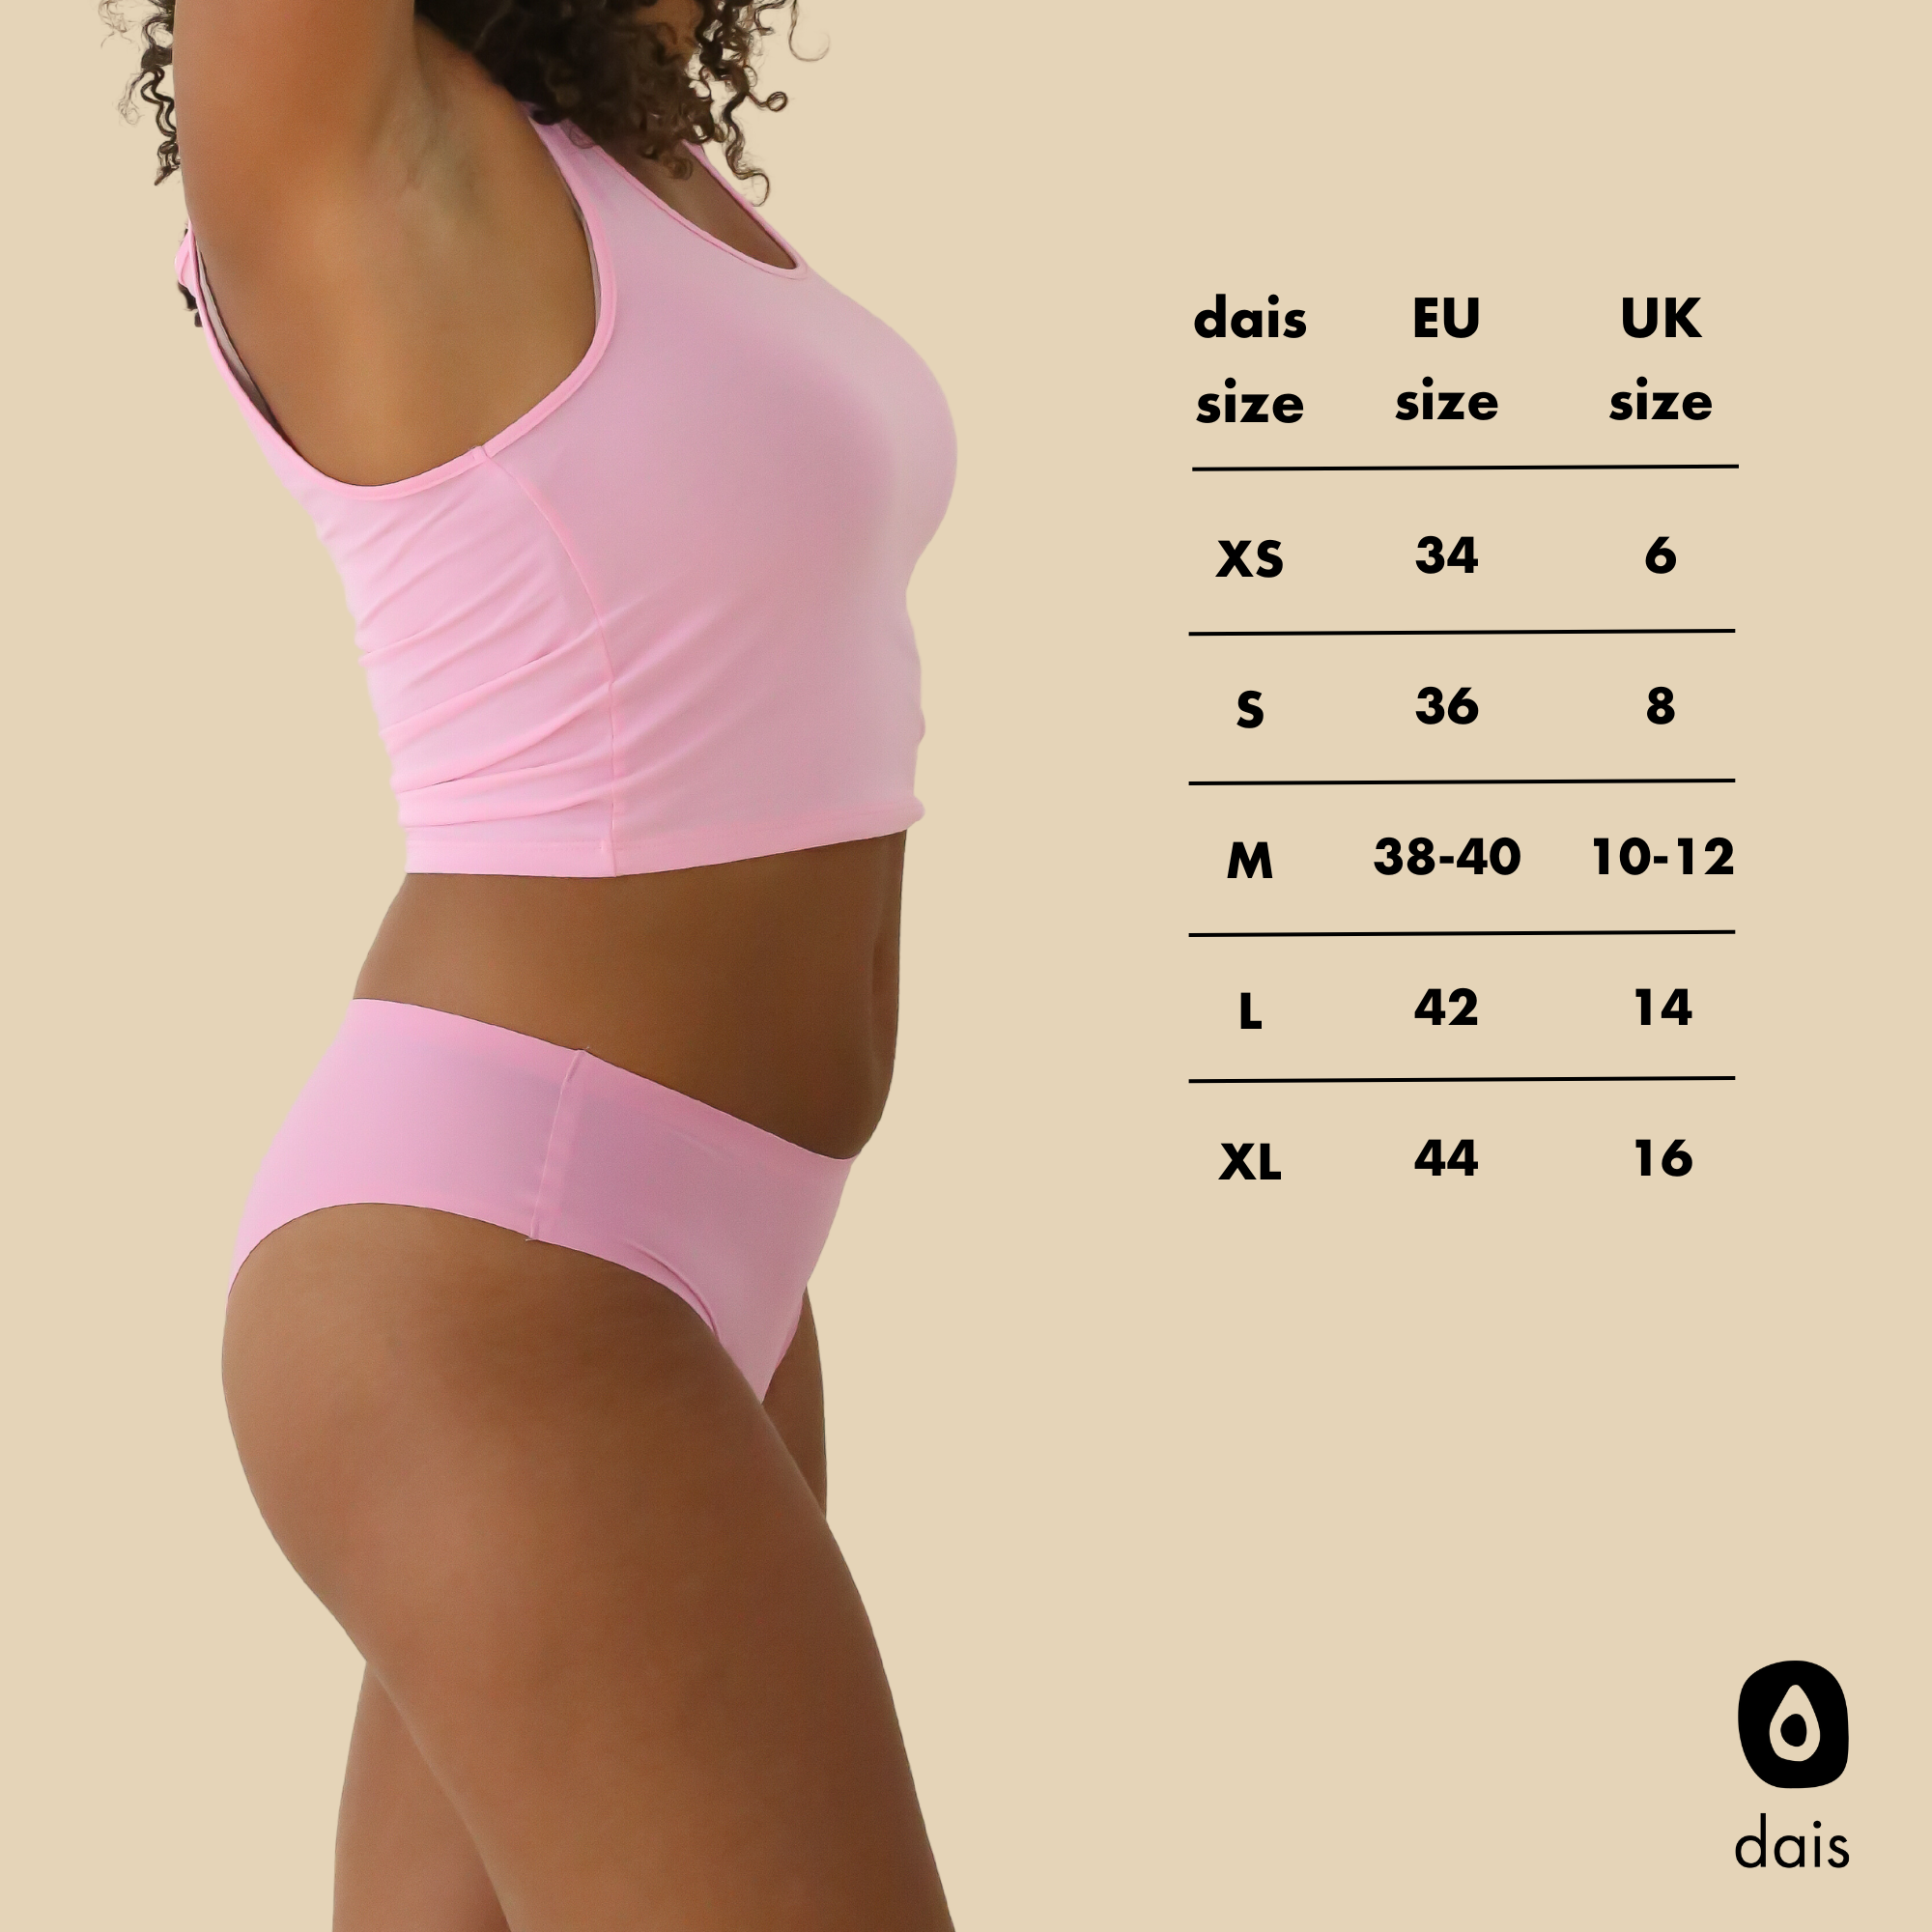 Size chart for dais period underwear cheeky in pink with size options of XS, S, M, L, XL with EU and UK size conversions.